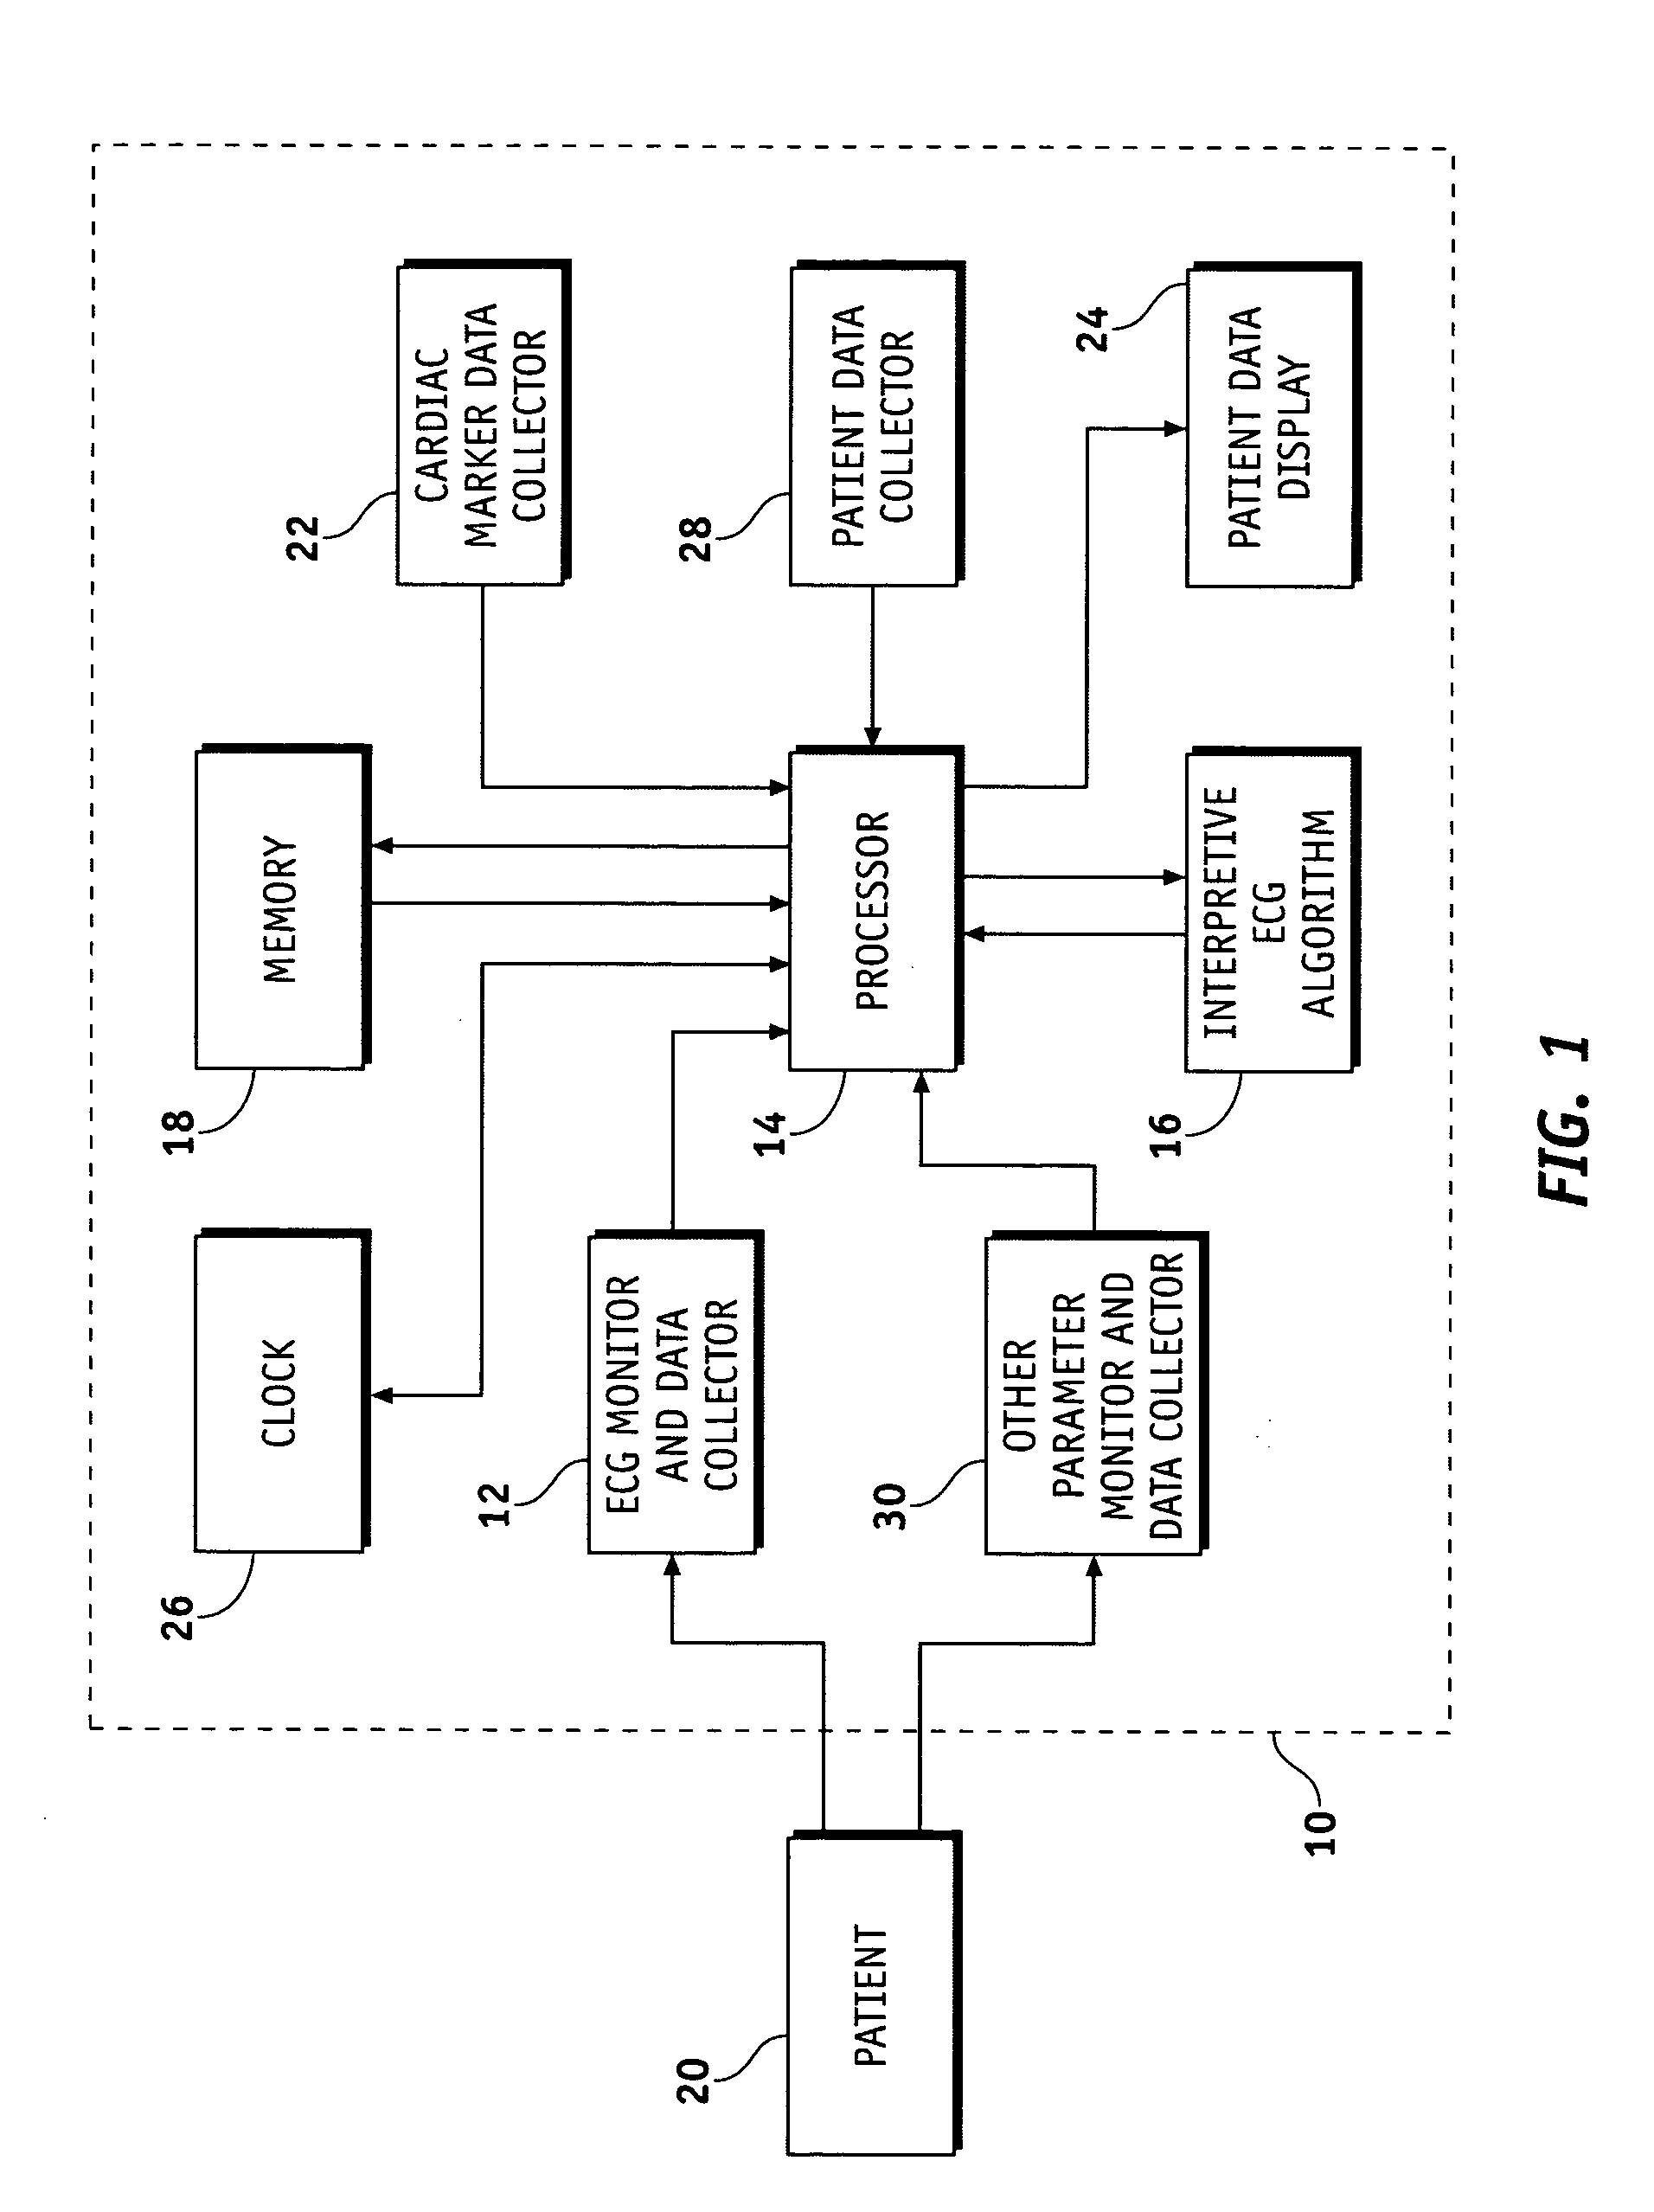 Apparatus and methods for documenting myocardial ischemia